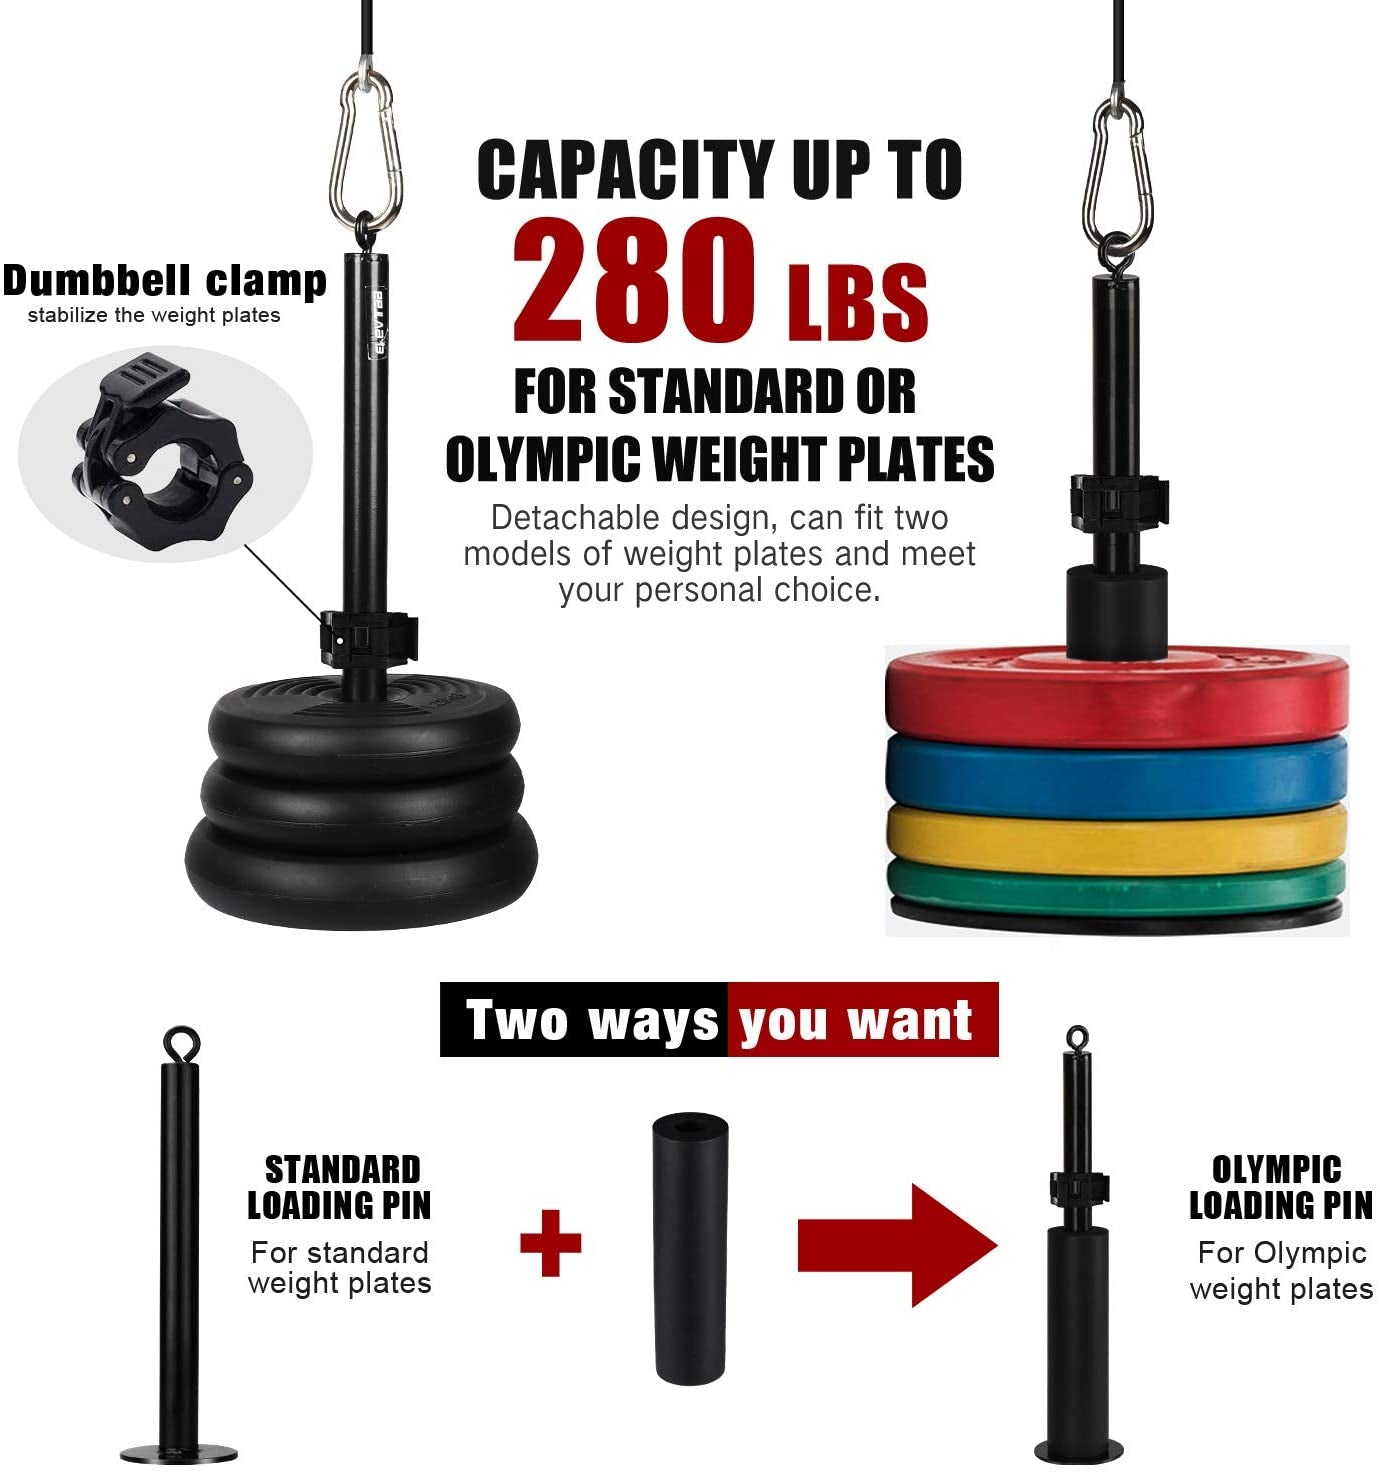 Upgraded Weight Cable Pulley System with Adjustable Length Cable for Multiple Muscle Groups, Ideal for Home Gym Fitness